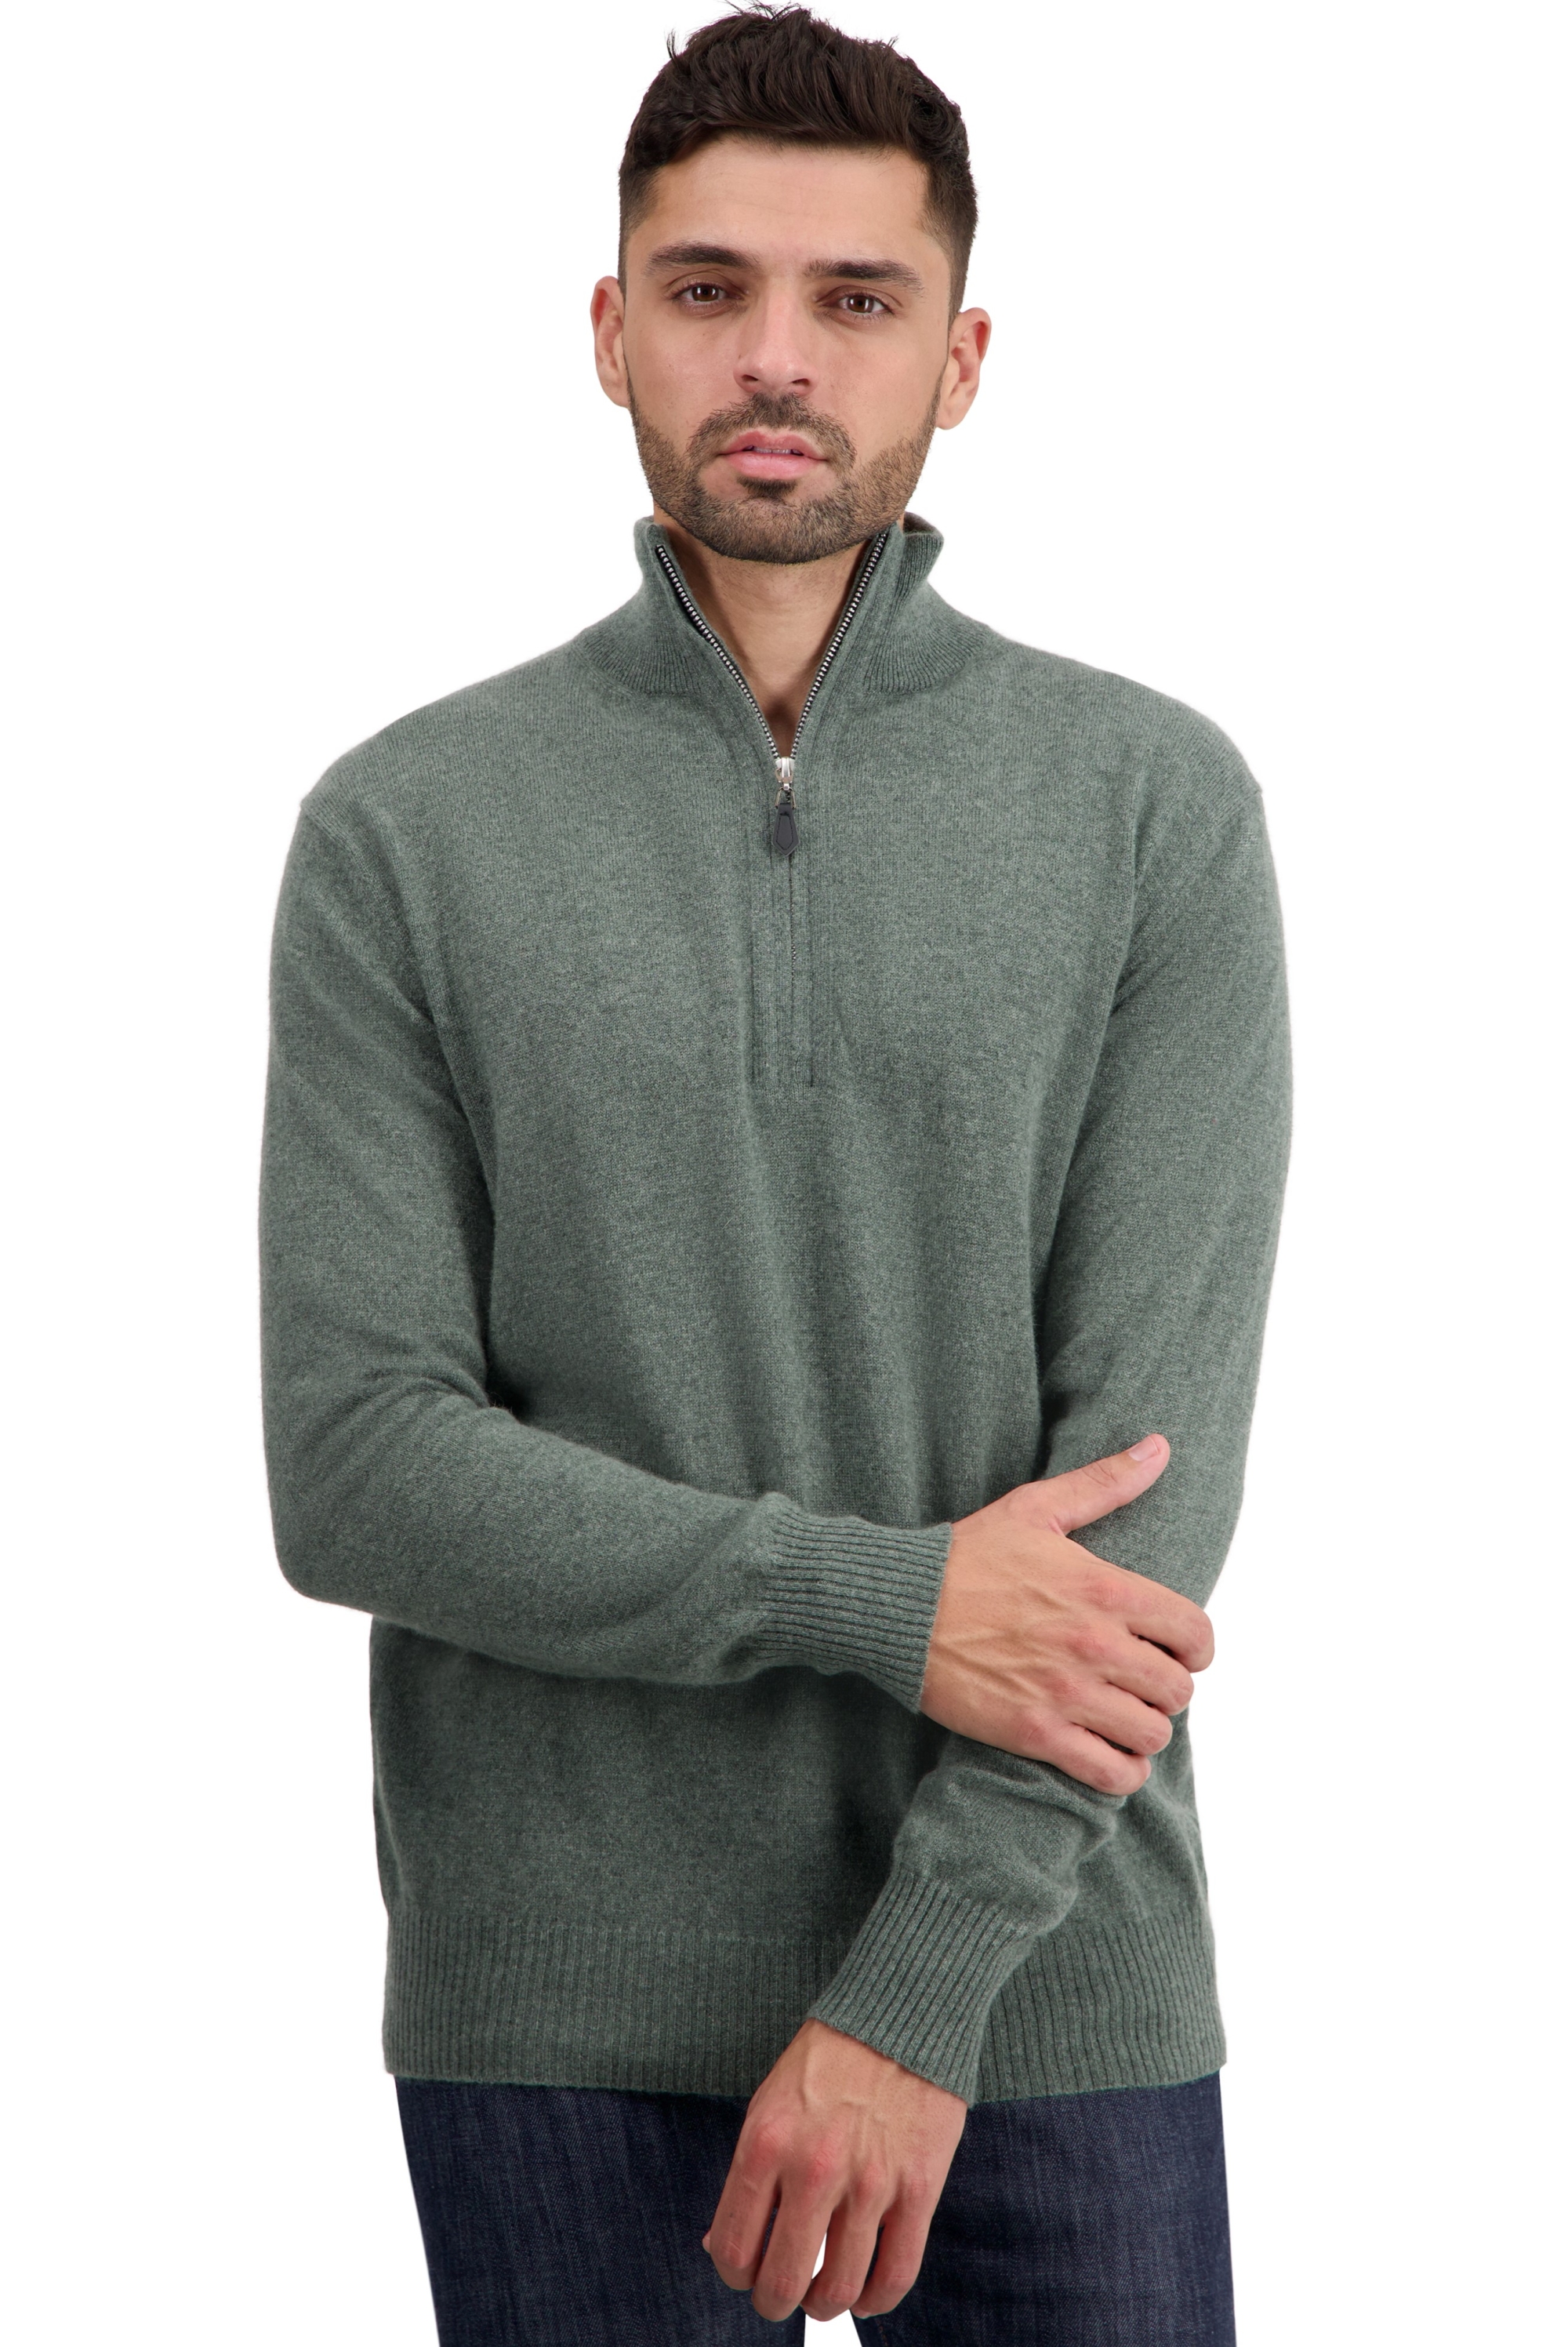 Cashmere men basic sweaters at low prices toulon first military green xl